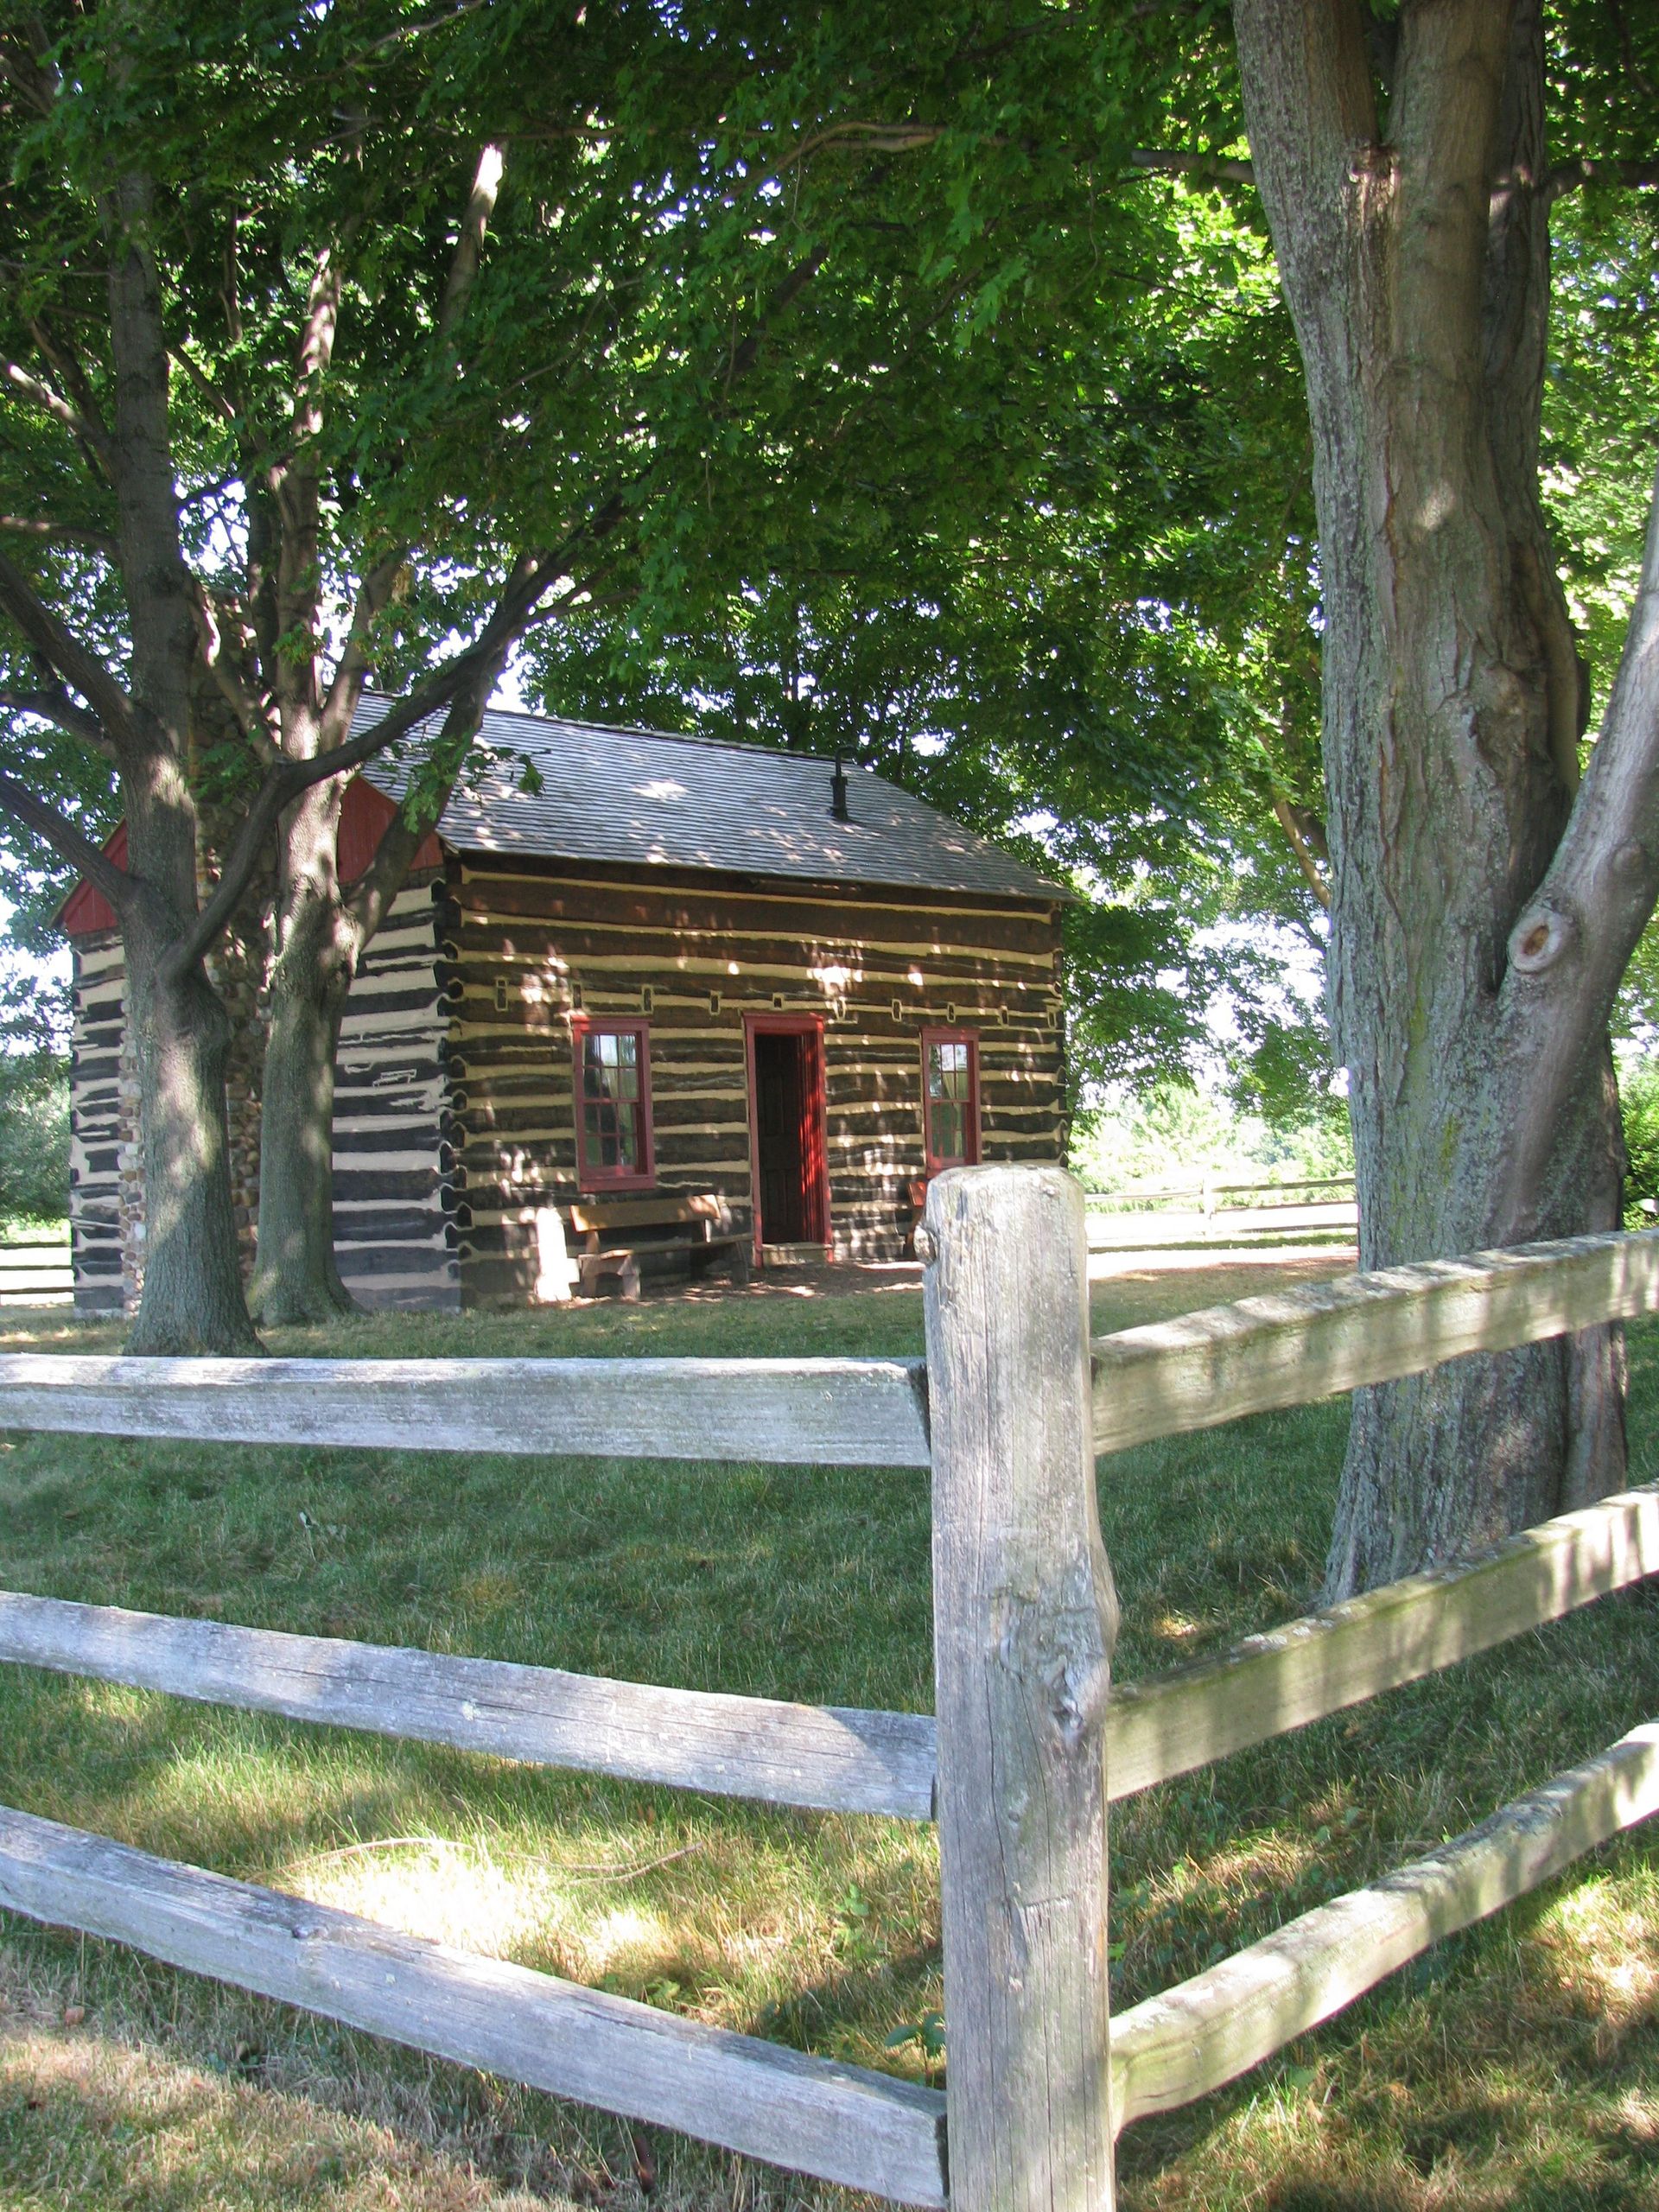 An exterior view of the Peter Whitmer home, where the Church was organized on April 6, 1830.